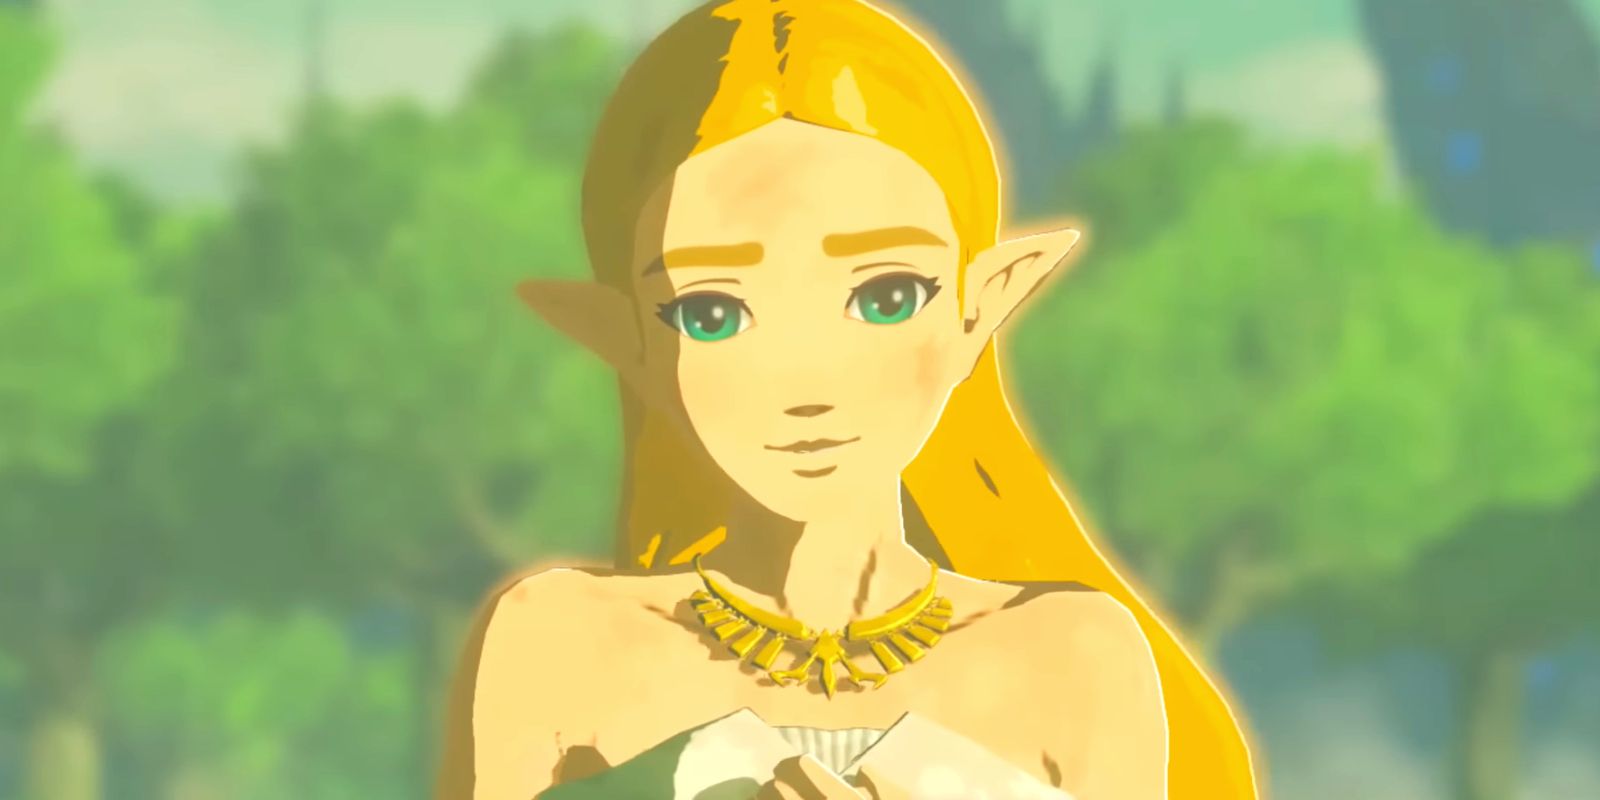 Zelda looking directly at the camera, head slightly tilted and smiling. Her hands are clasped in front of her.